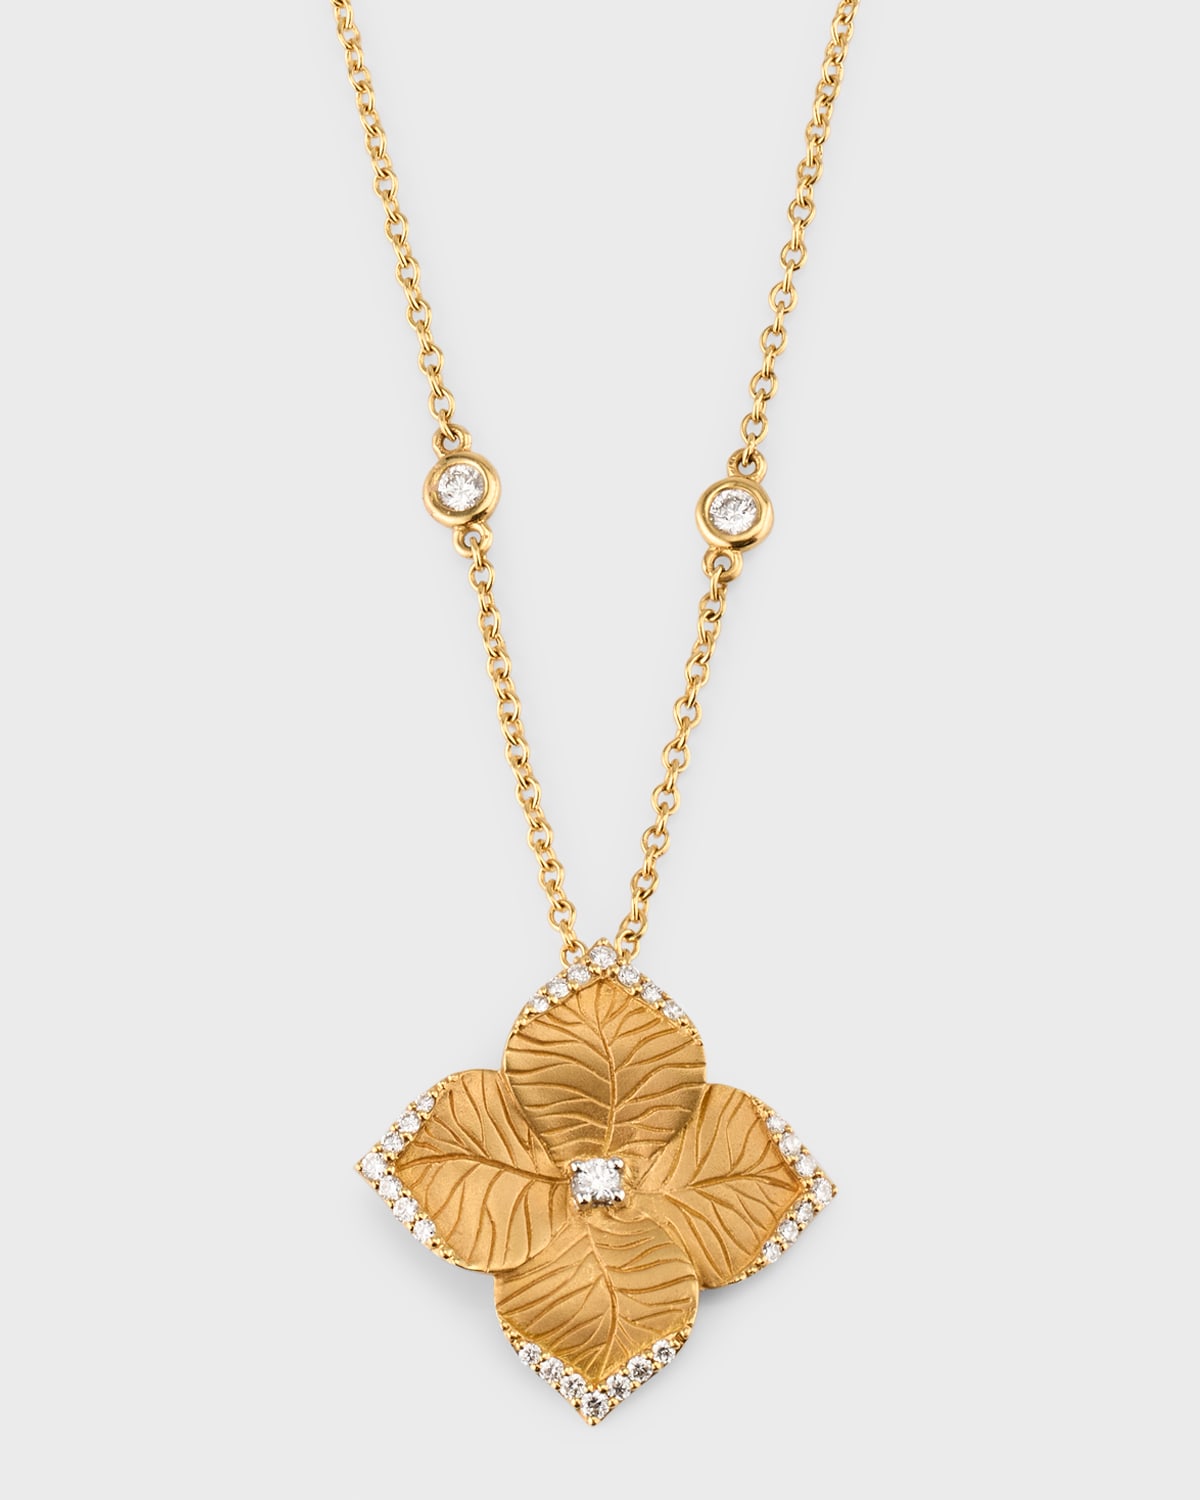 18K Yellow Gold Large Flower Pendant Necklace with Round Diamonds